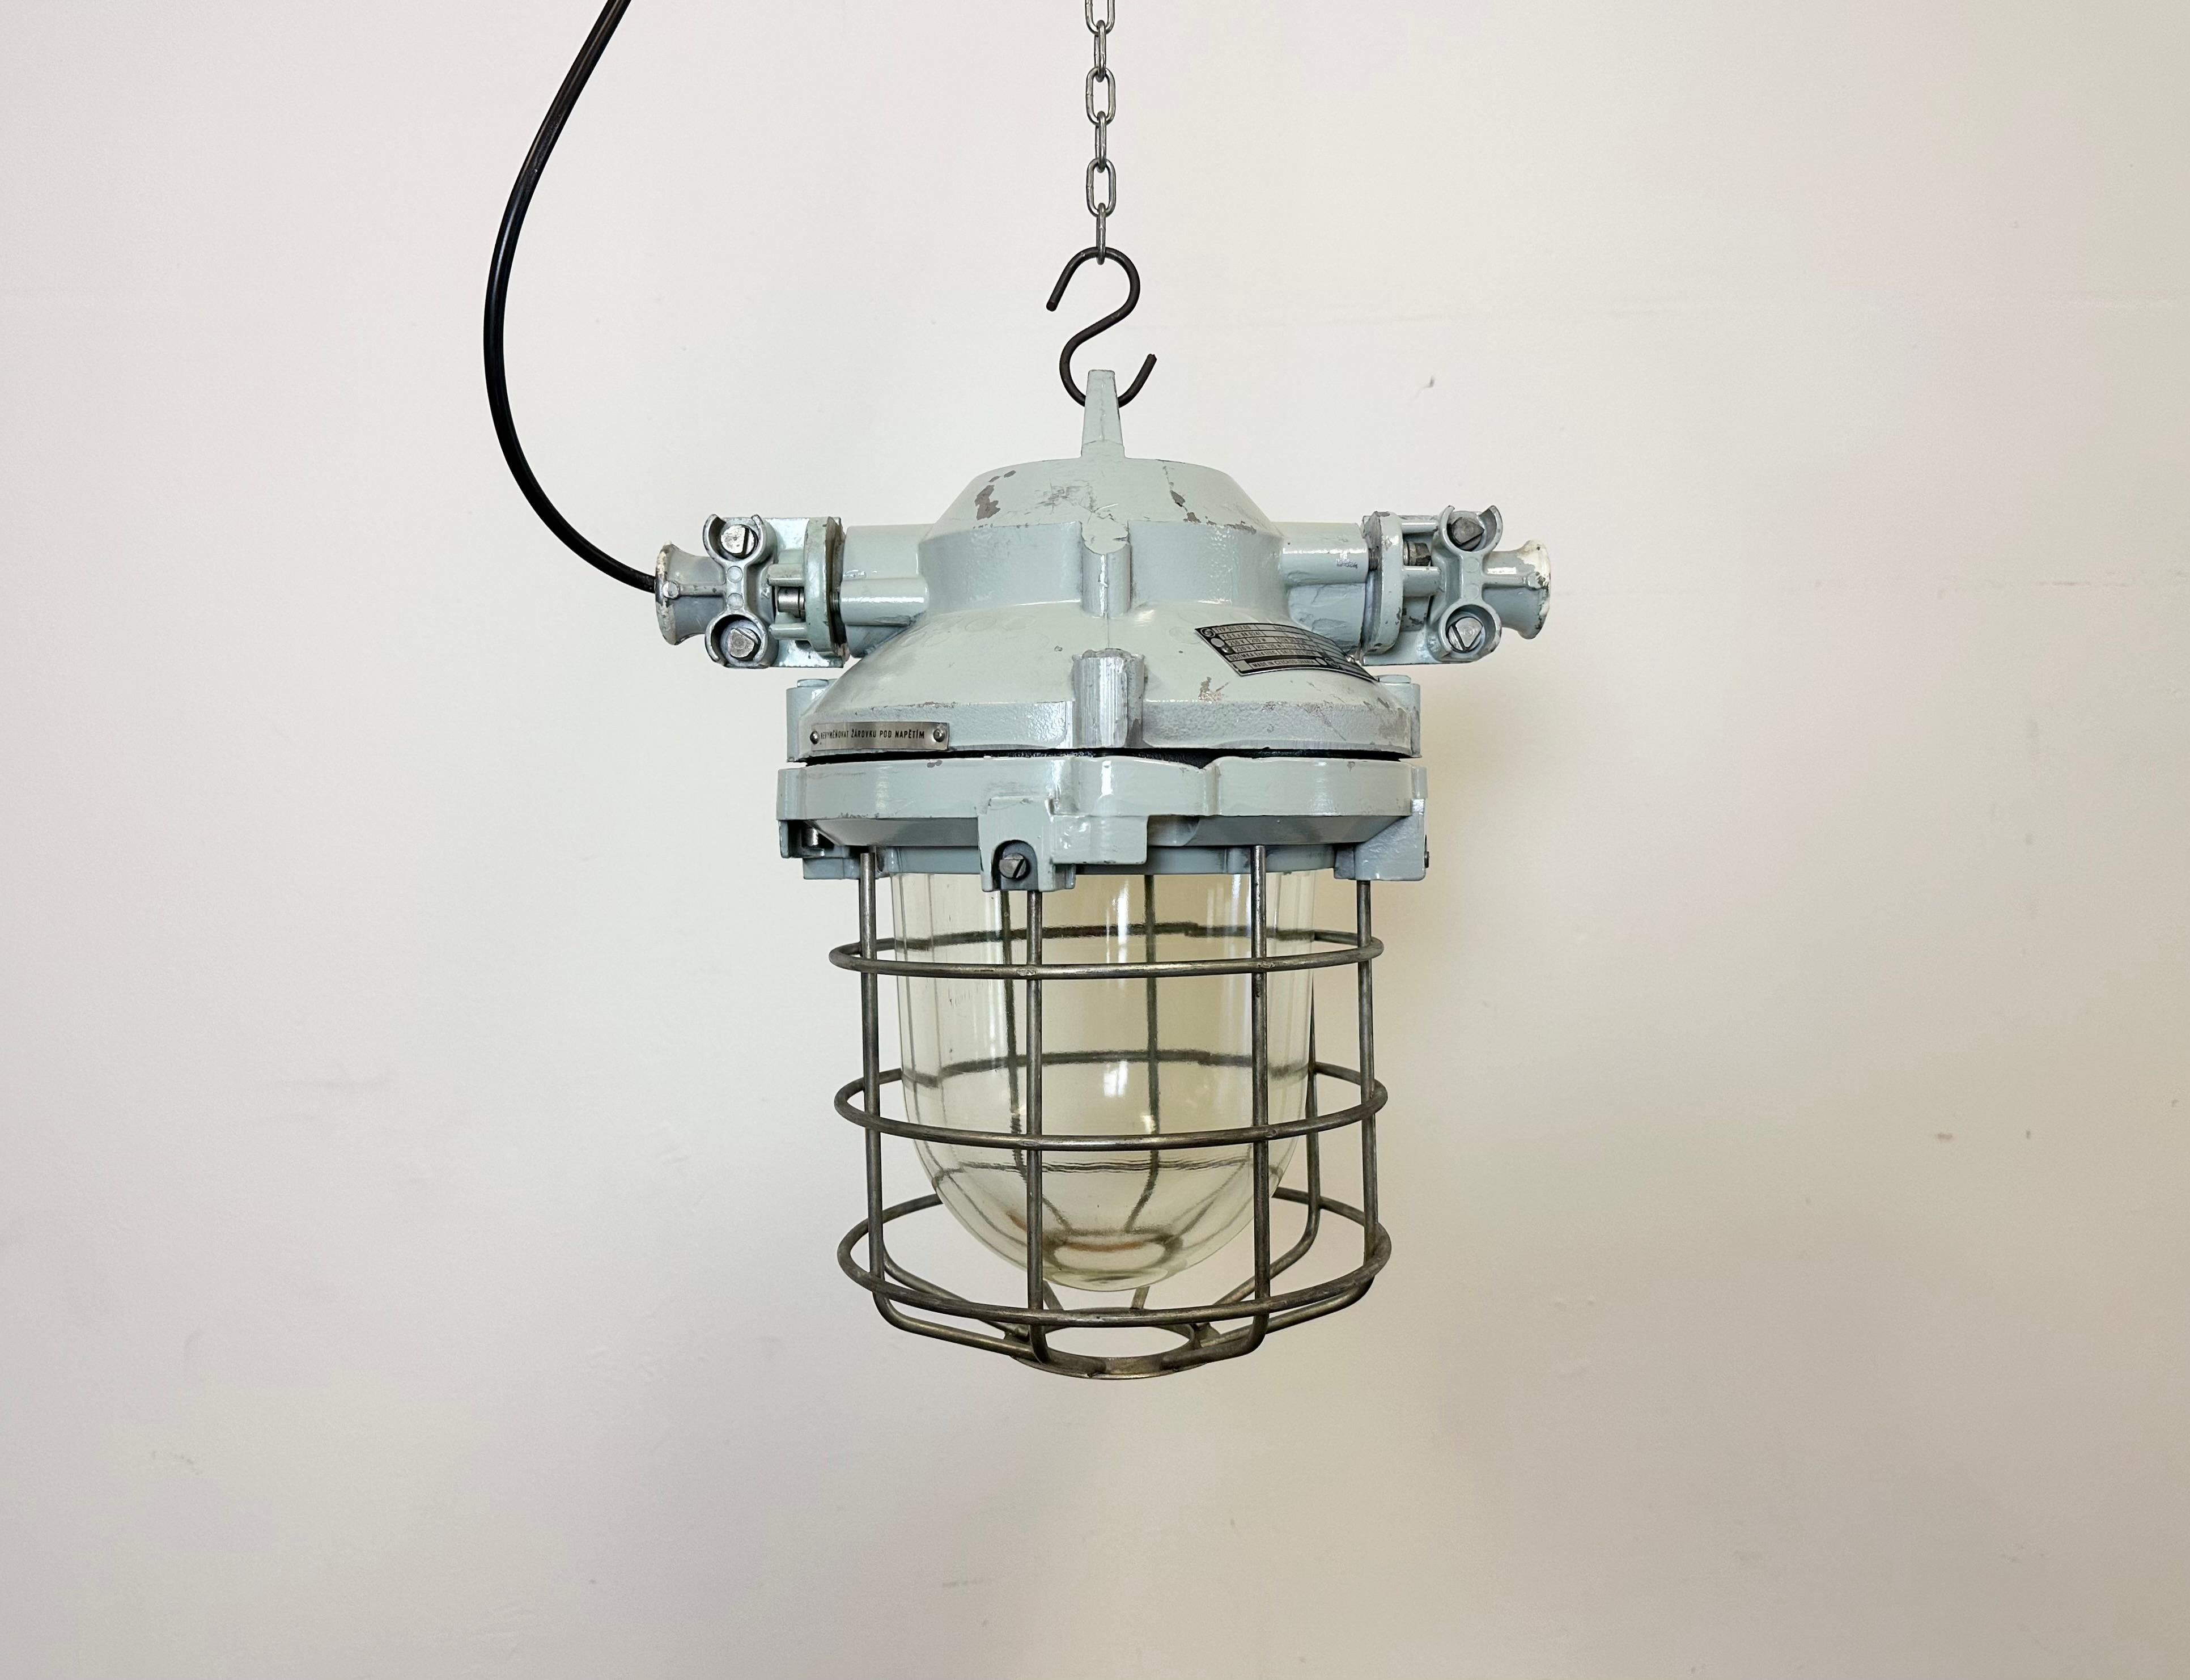 Industrial factory hanging light manufactured by Elektrosvit in former Czechoslovakia during the 1970s. It features a cast aluminium body, an iron cage and explosion-proof glass.
The socket requires standard E27 / E26 lightbulbs. New wire. The